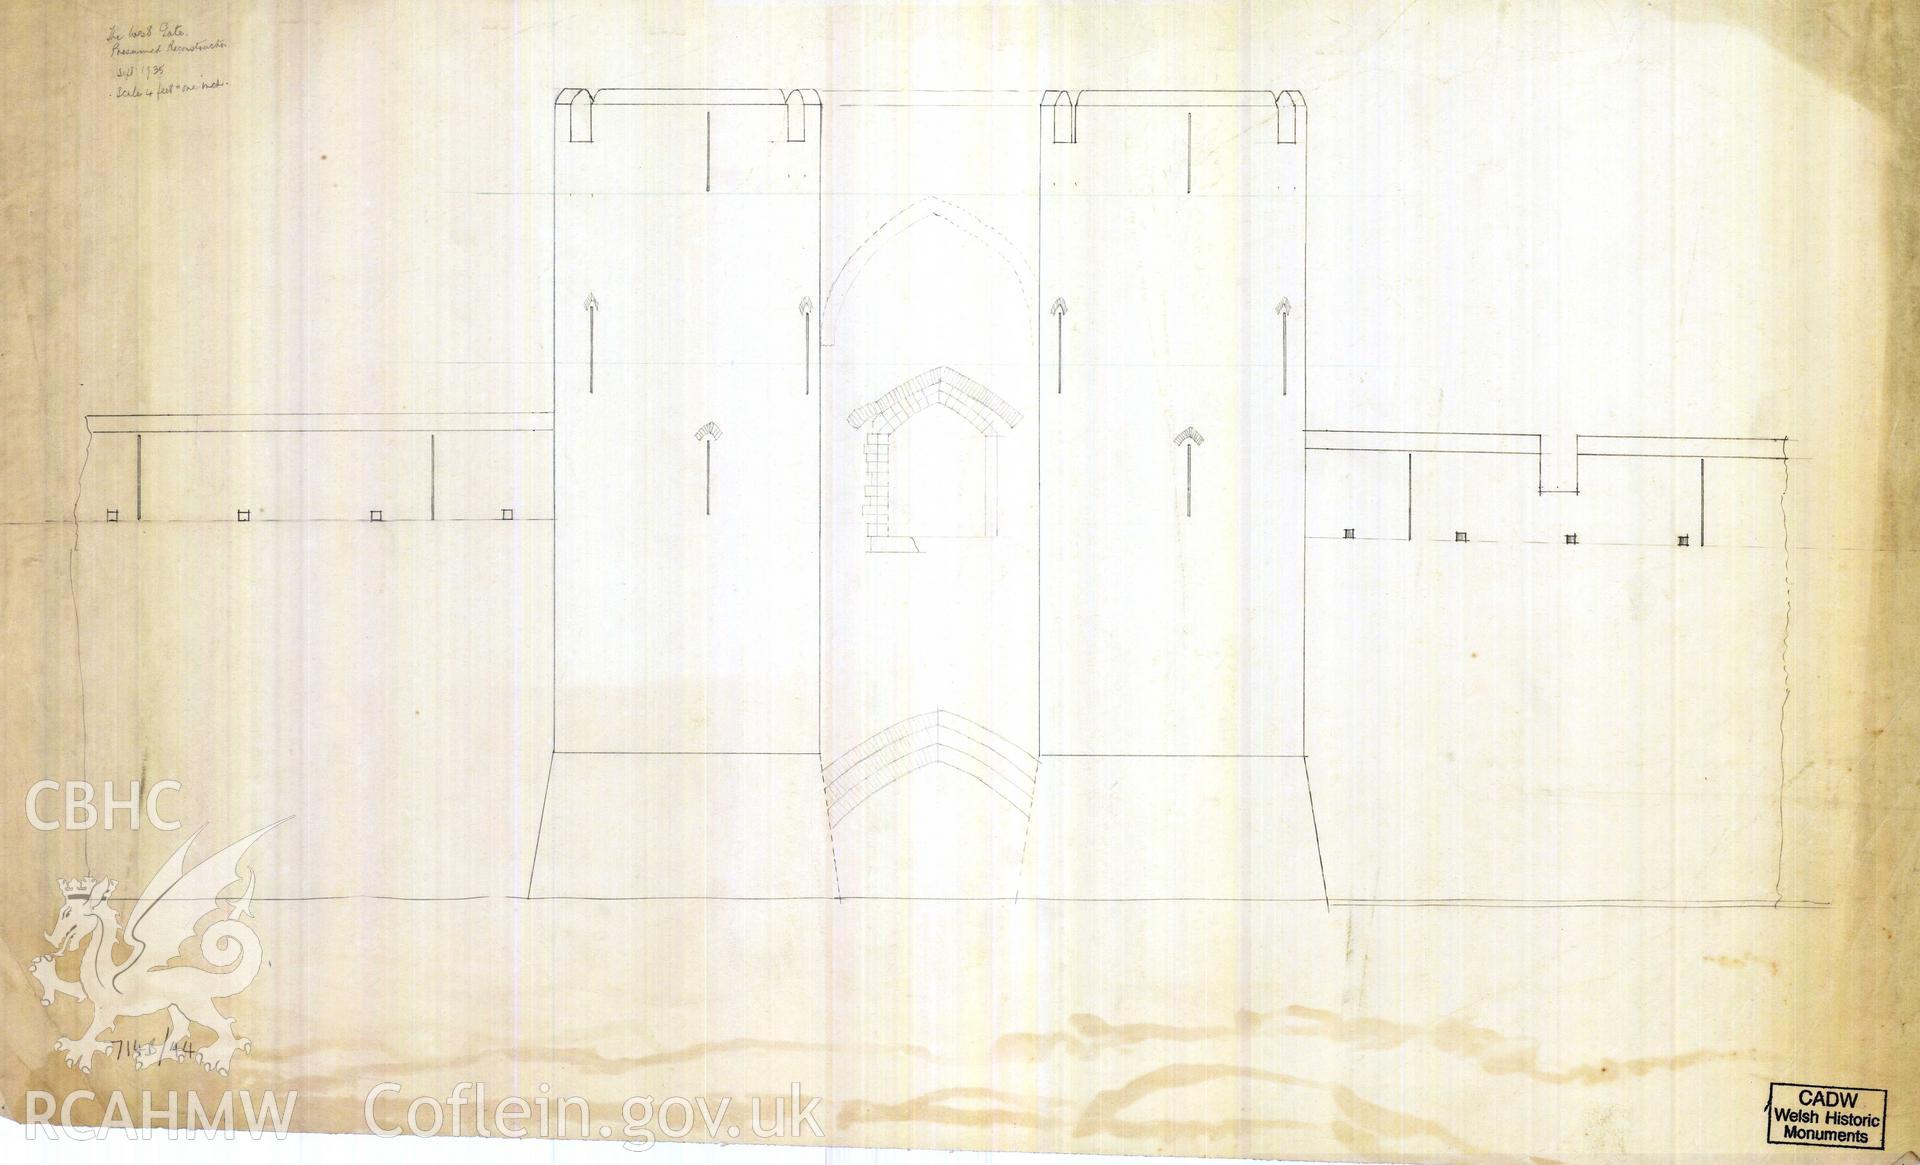 Digital copy of Cadw guardianship monument drawing of Caerphilly Castle. Mid W gate, W (ext) elev. Cadw ref. no: 714B/44. Scale 1:48. Original drawing withdrawn and returned to Cadw at their request.